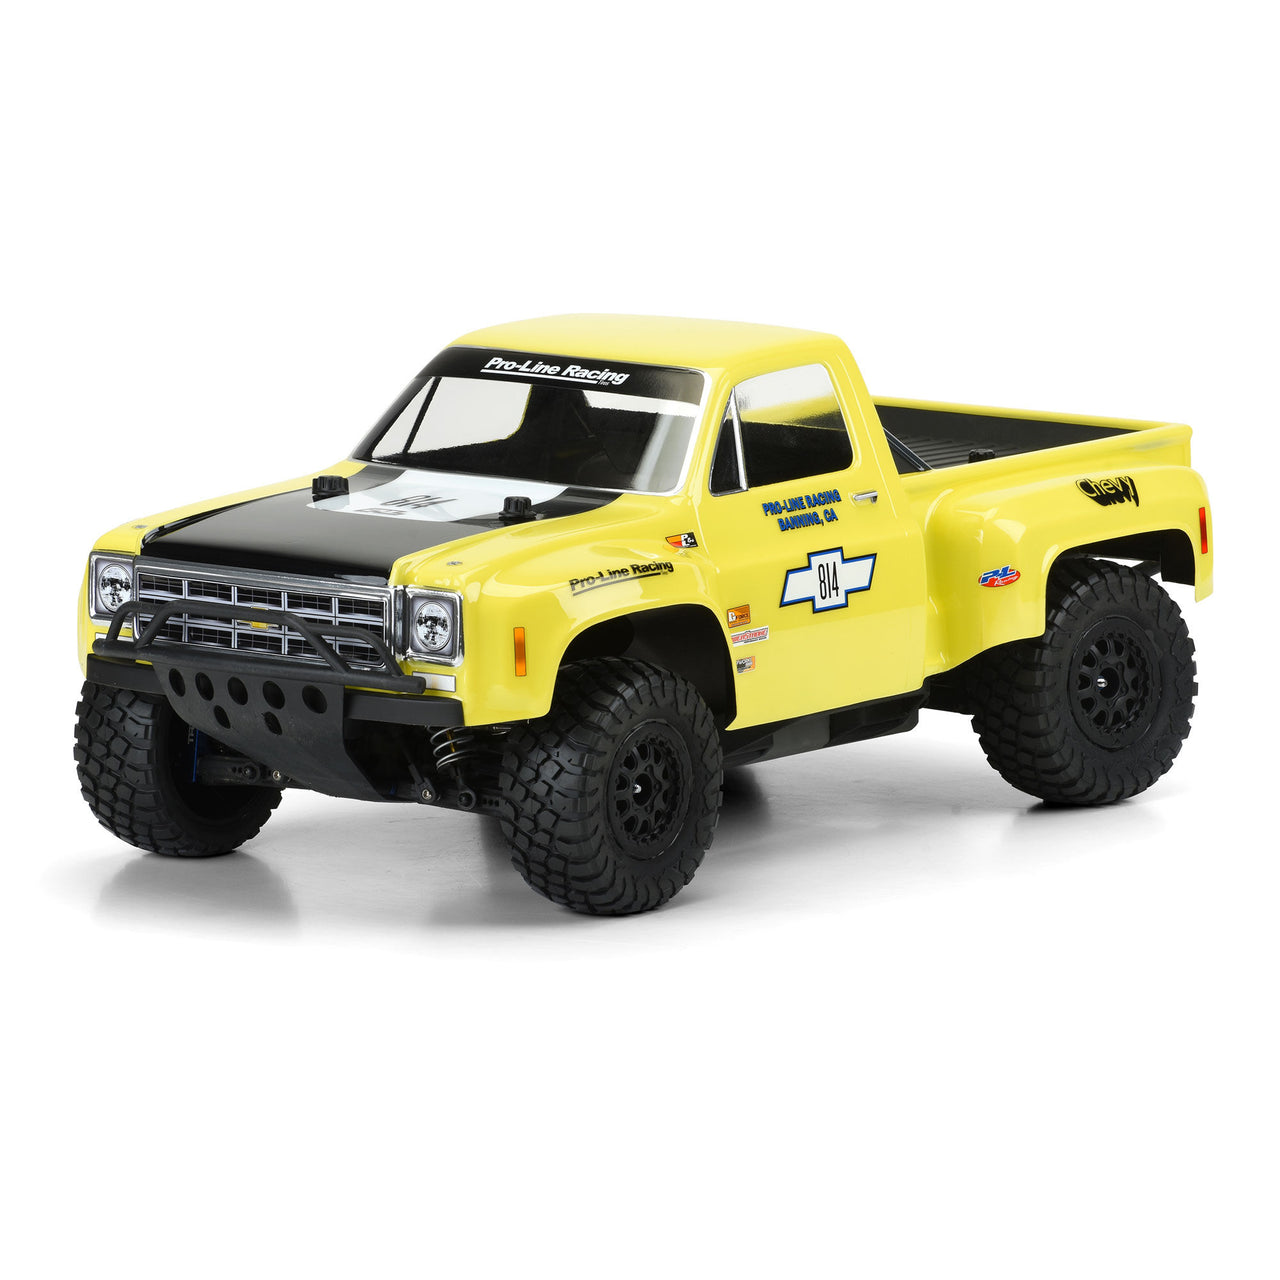 PRO351000 1/10 1978 Chevy C-10 Race Truck Clear Body: Short Course